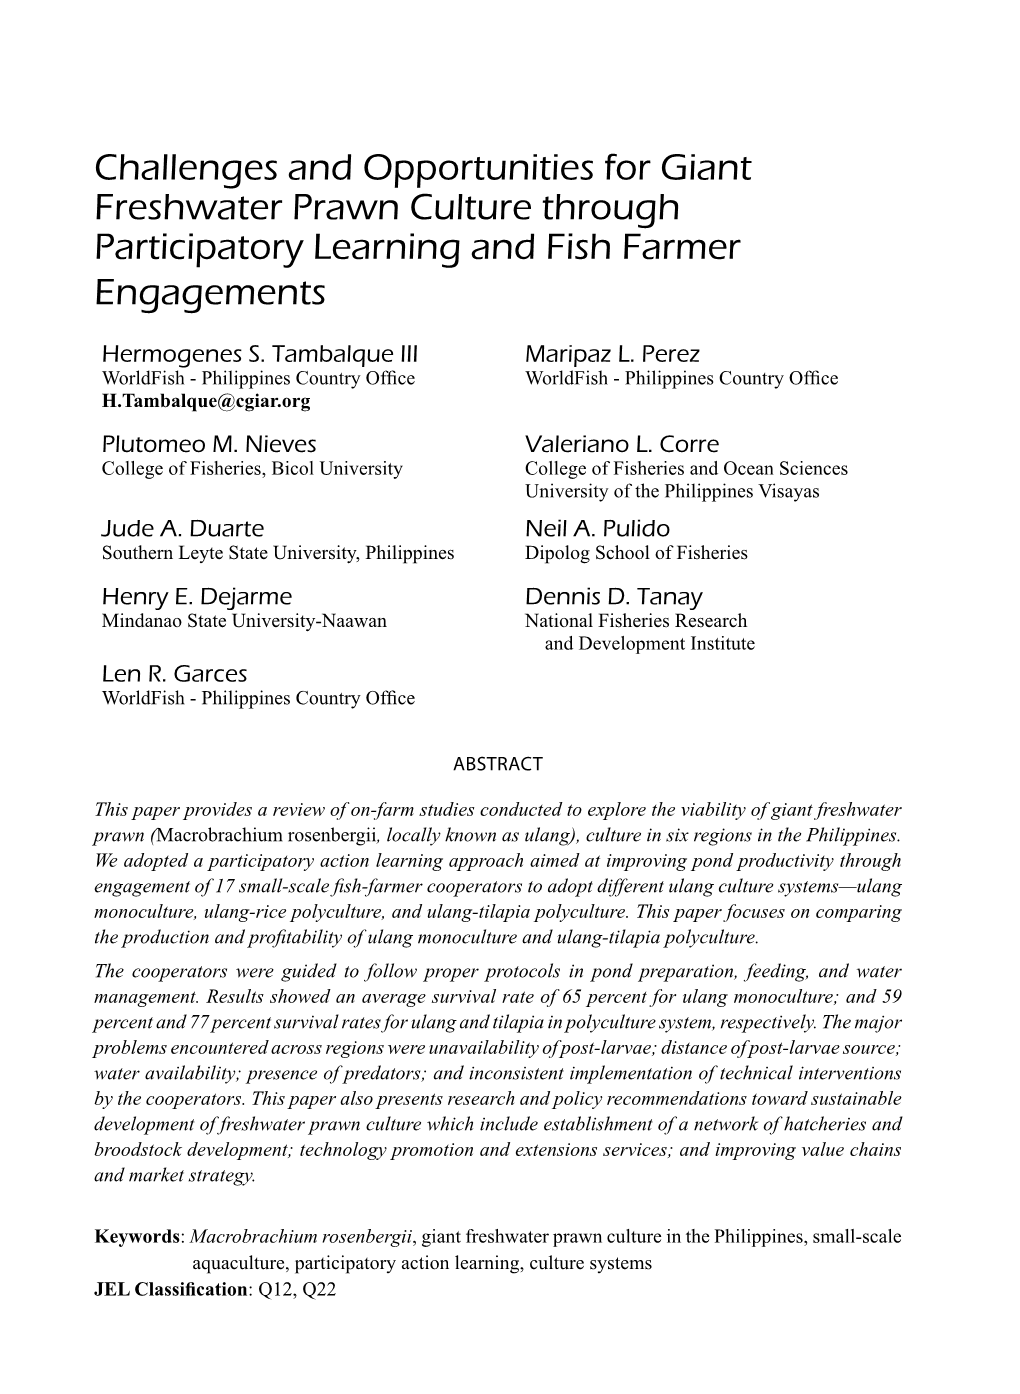 Challenges and Opportunities for Giant Freshwater Prawn Culture Through Participatory Learning and Fish Farmer Engagements